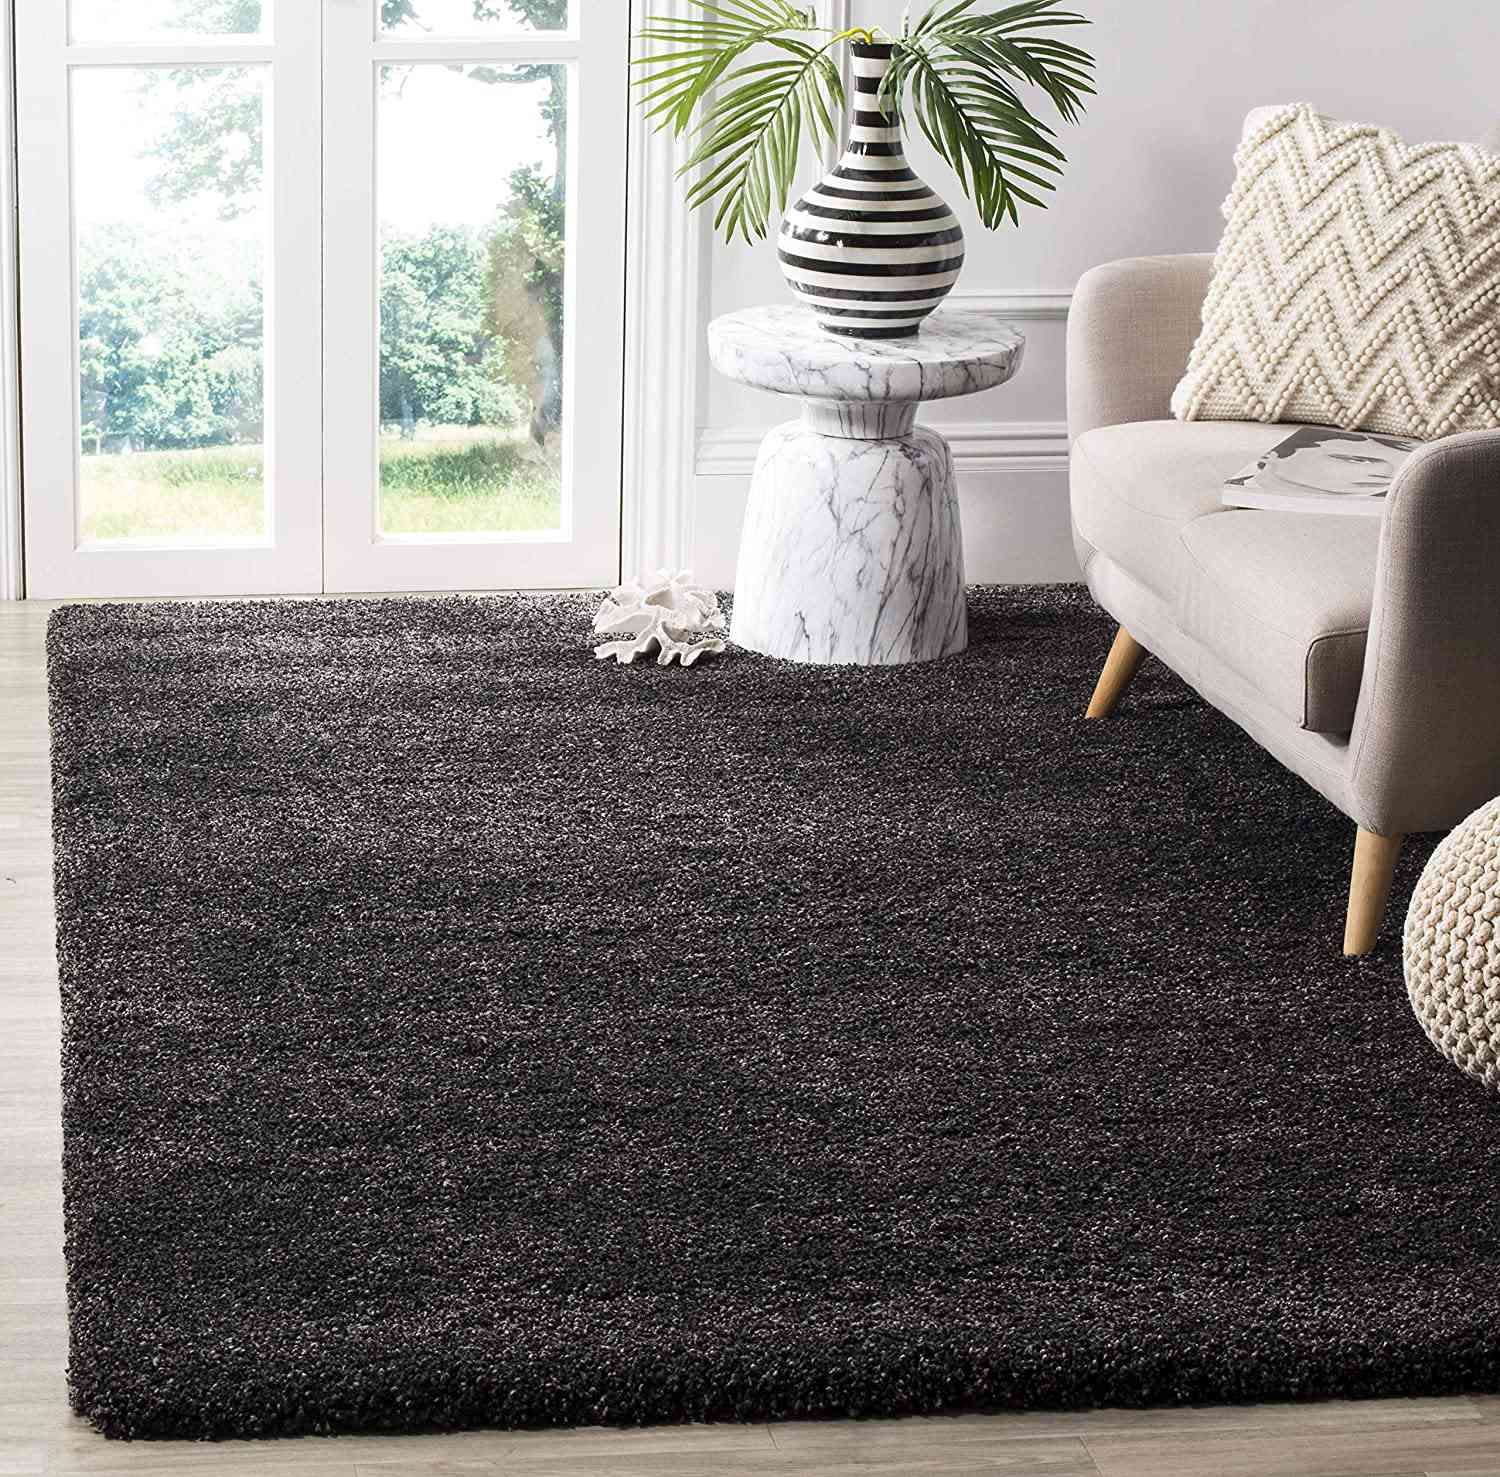 The 9 Best Shag Rugs Of 2023 With Regard To Solid Shag Rugs (View 6 of 15)